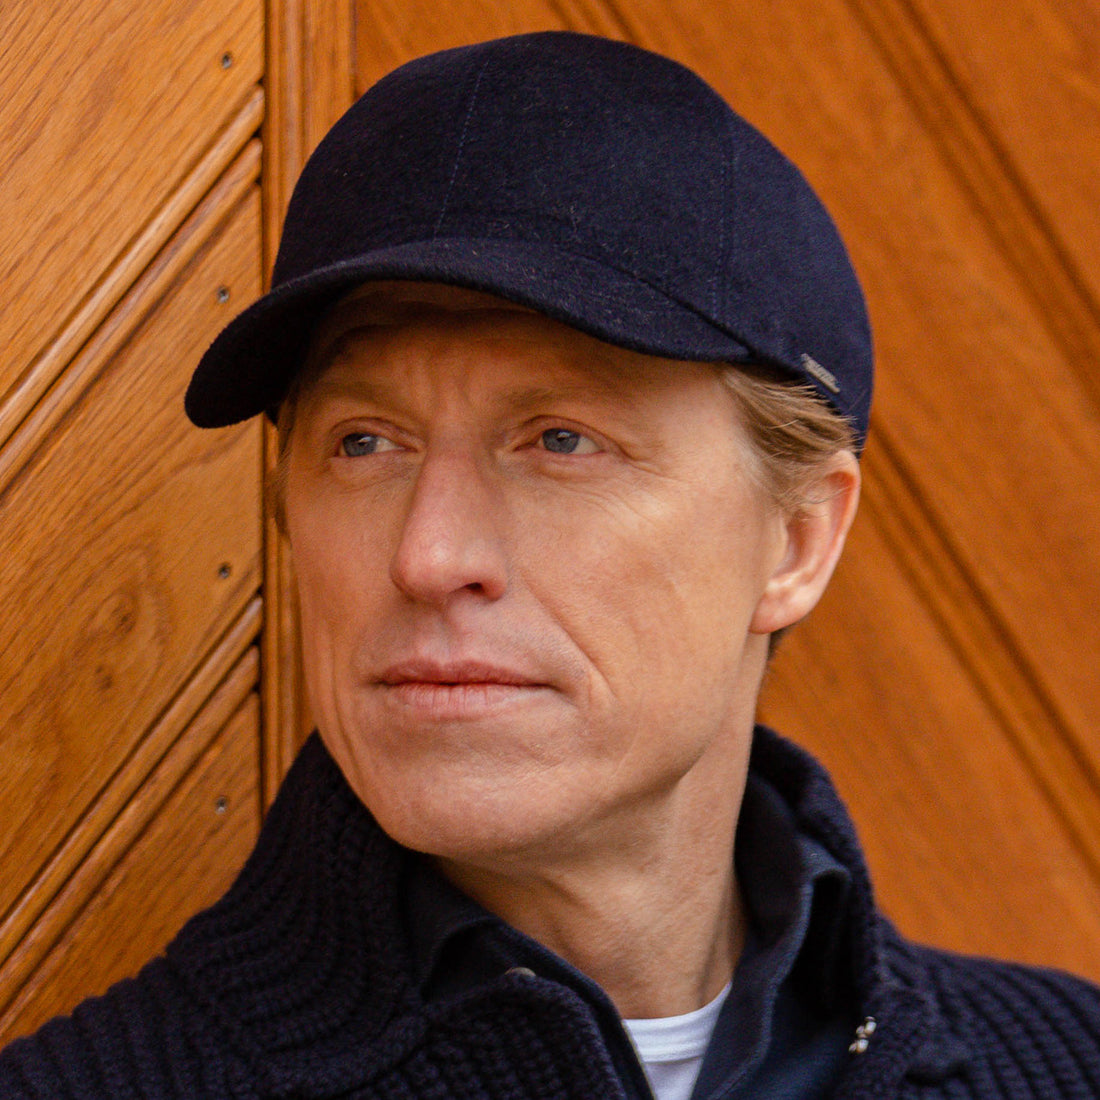 A man wearing a cap looks off into the distance, with a wooden door in the background.